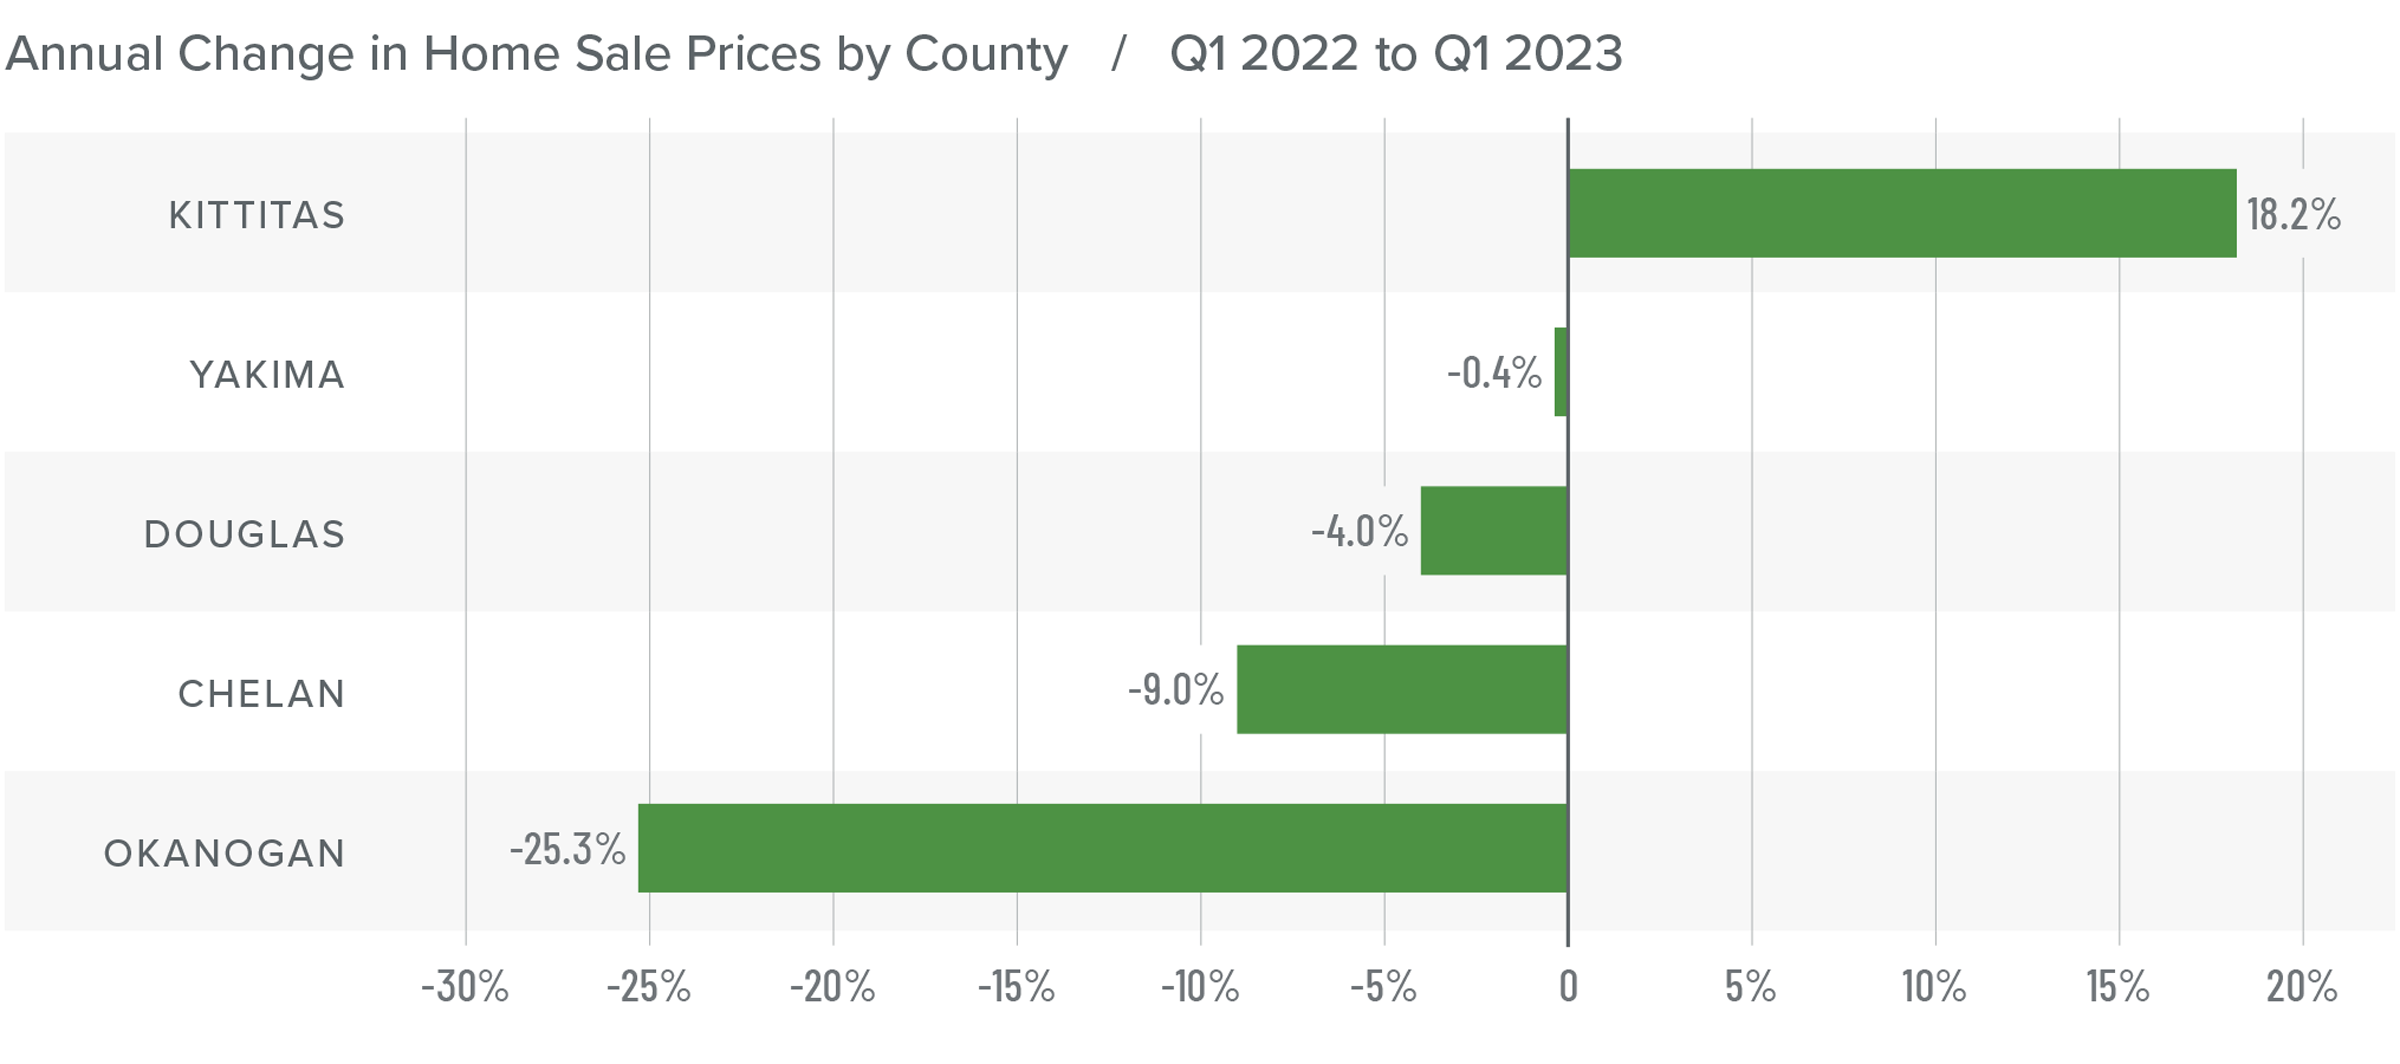 A bar graph showing the annual change in home sale prices for various counties in Central Washington from Q1 2022 to Q1 2023. All counties have a negative percentage year-over-year change, except Kittitas at 18.2%. Here are the rest: Yakima at -0.4%, Douglas at -4%, Chelan -9%, and Okanogan -25.3%.